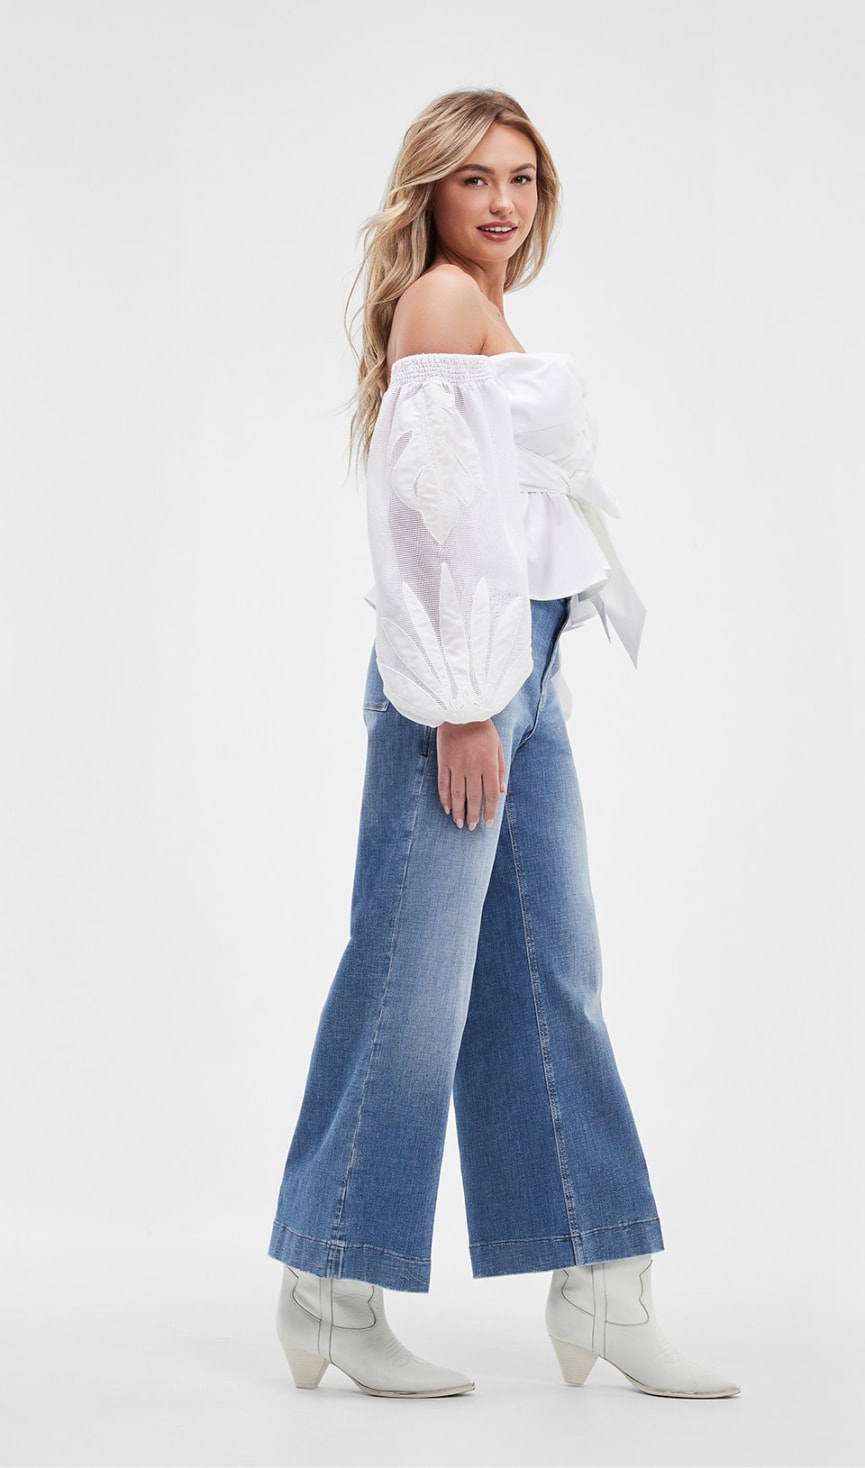 The Denim Guide: Wide & Flare Jeans